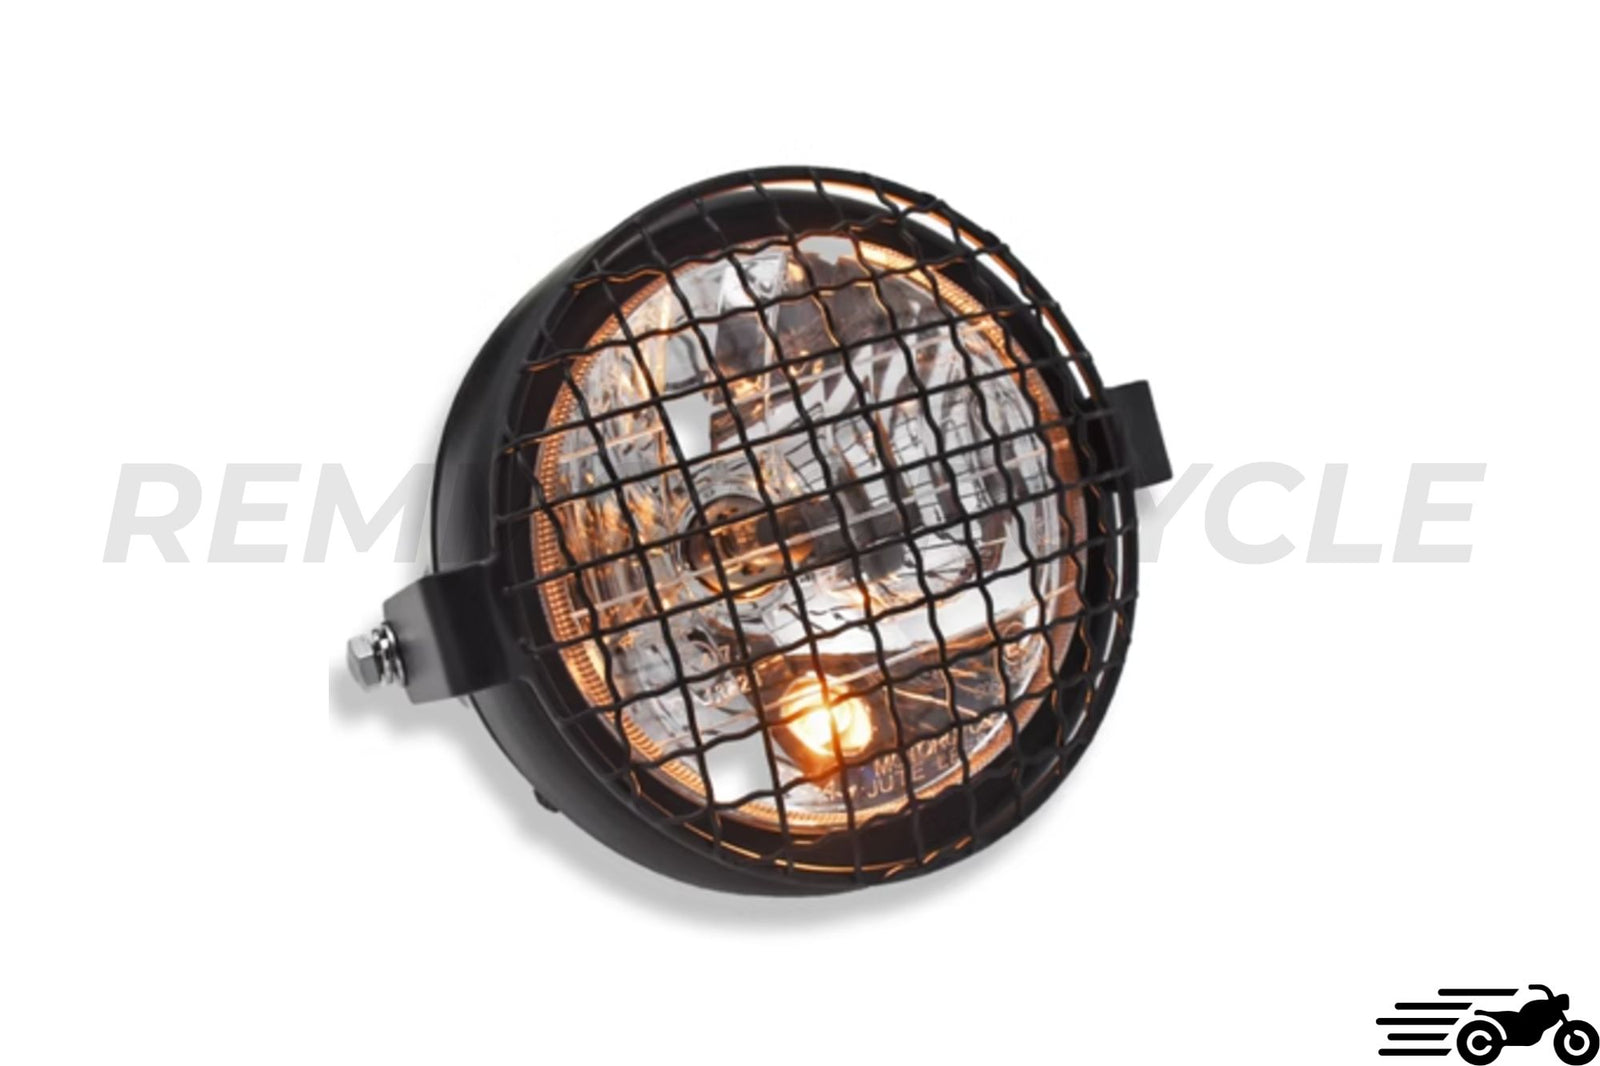 Scrambled headlight approved with grid